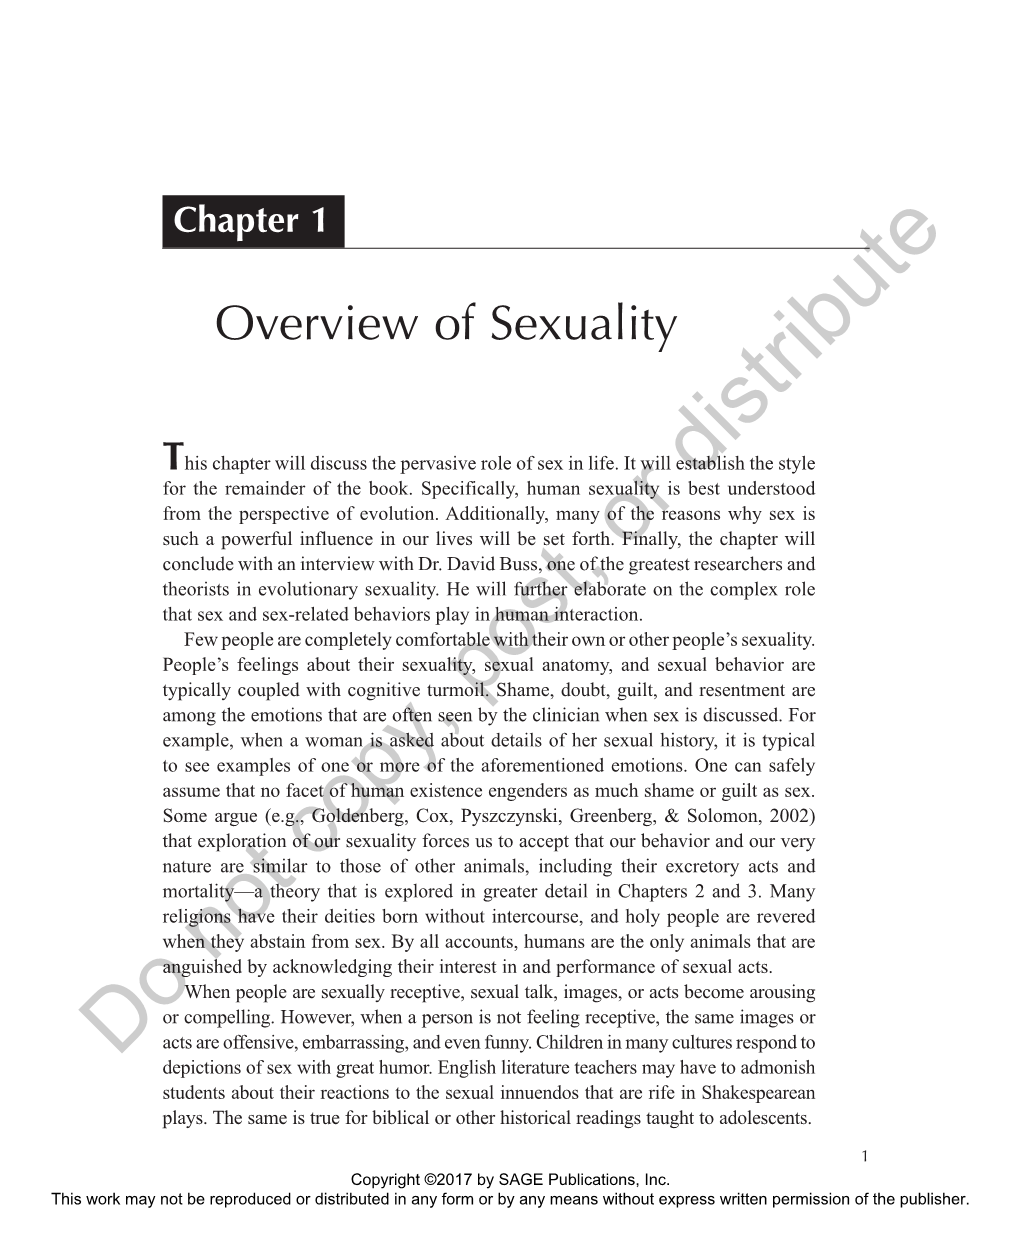 Overview of Sexuality